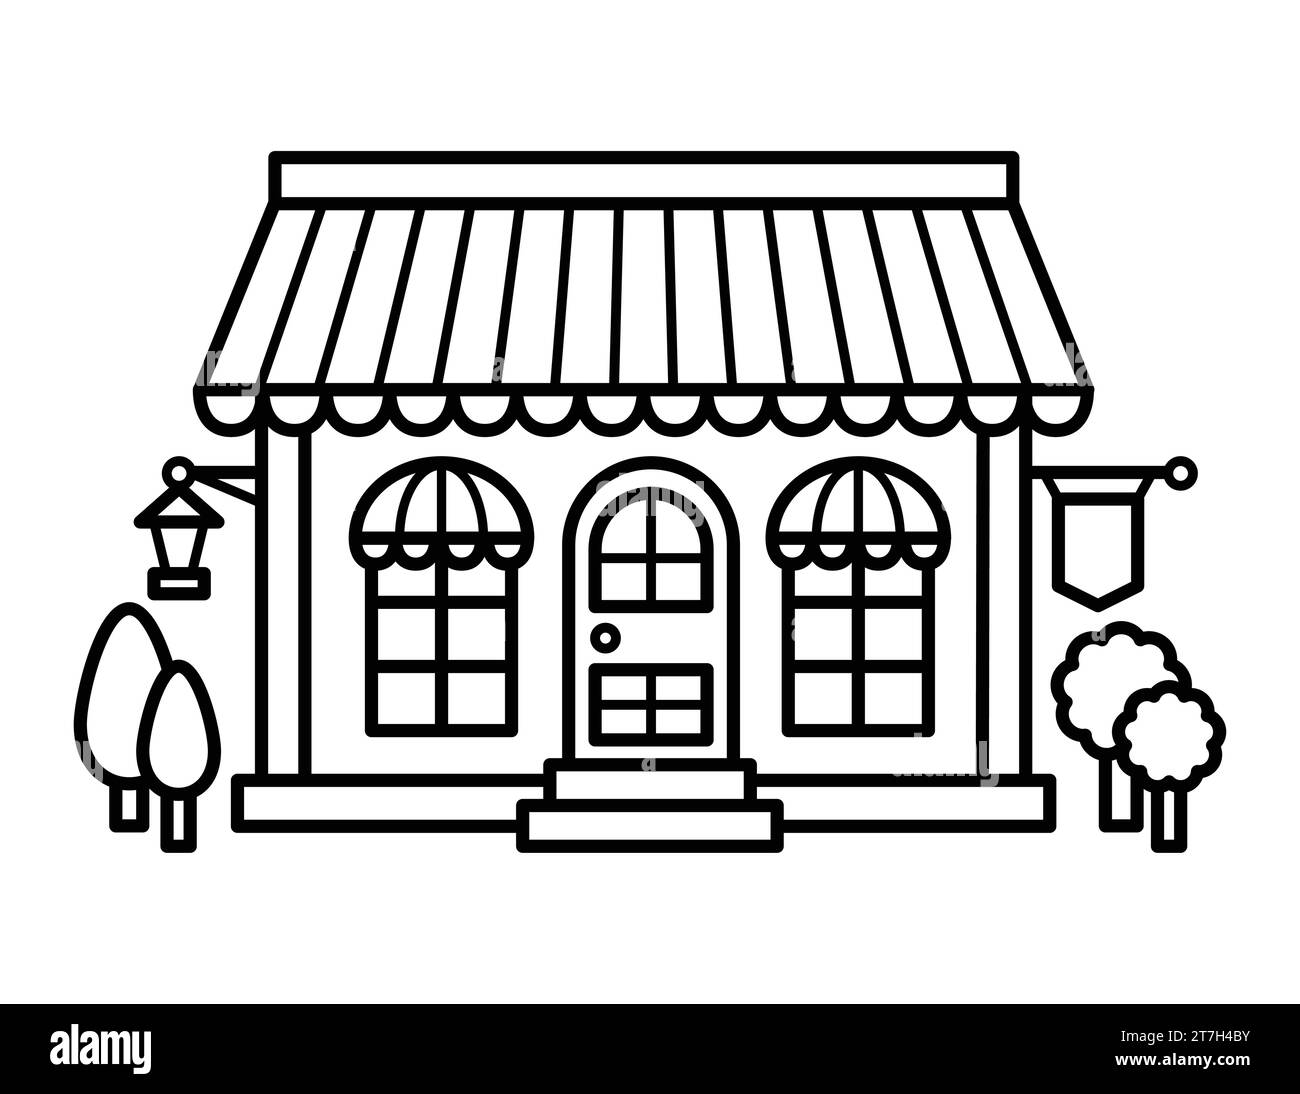 Cafe restaurant front coloring page for children stock vector image art